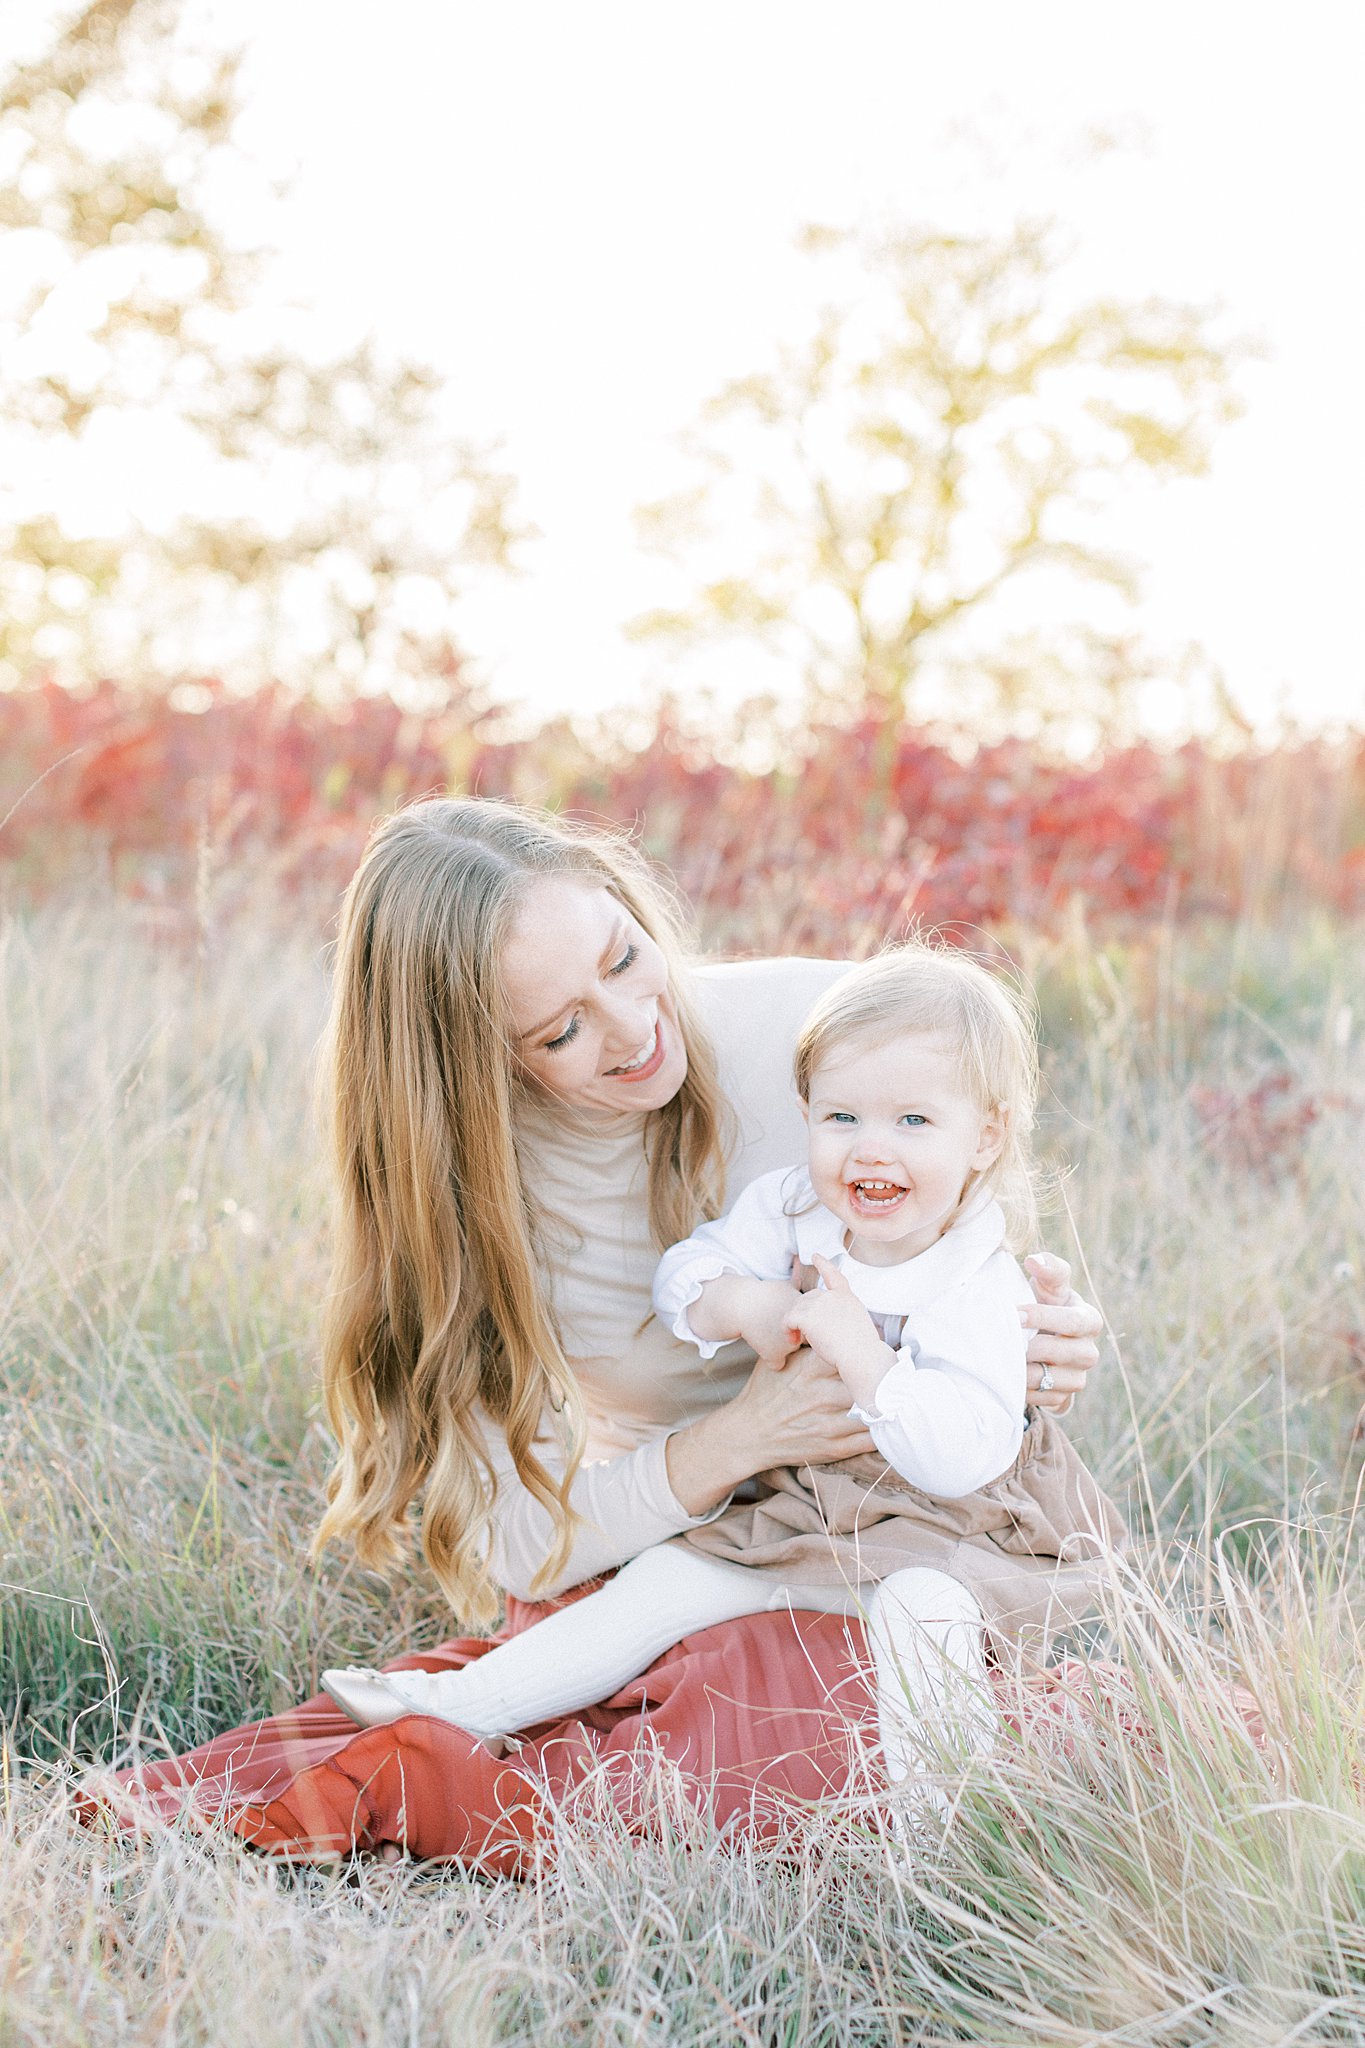 A young girl in a brown dress smiles and plays while sitting in mom's lap in a field of tall grass at sunset Things to do in Dallas with Toddlers